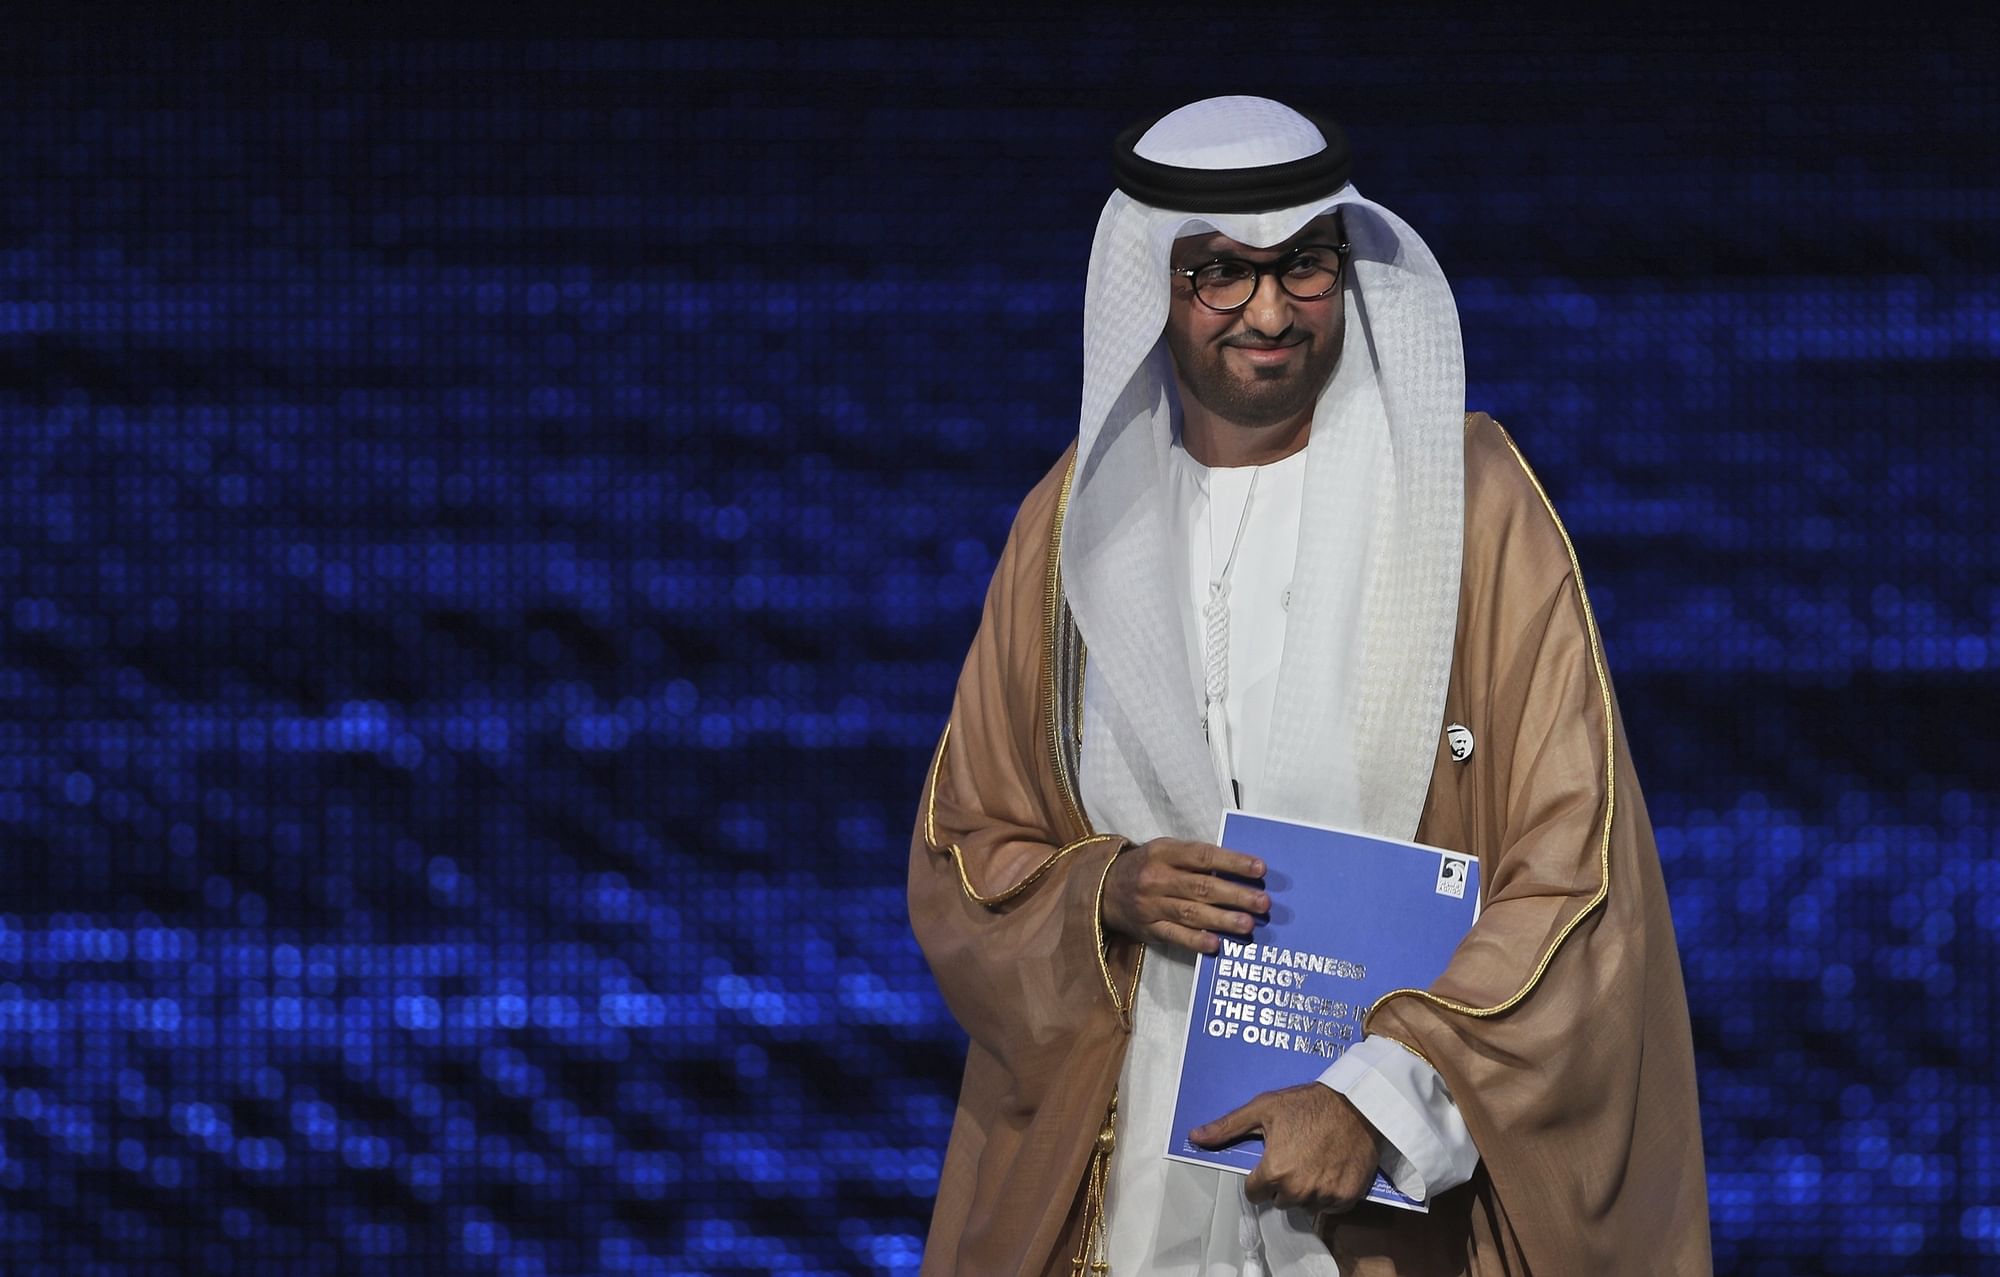 <div class="paragraphs"><p>Sultan al-Jaber is UAE's minister of industry and technology and the Director-General and CEO of the Abu Dhabi National Oil Company.</p></div>